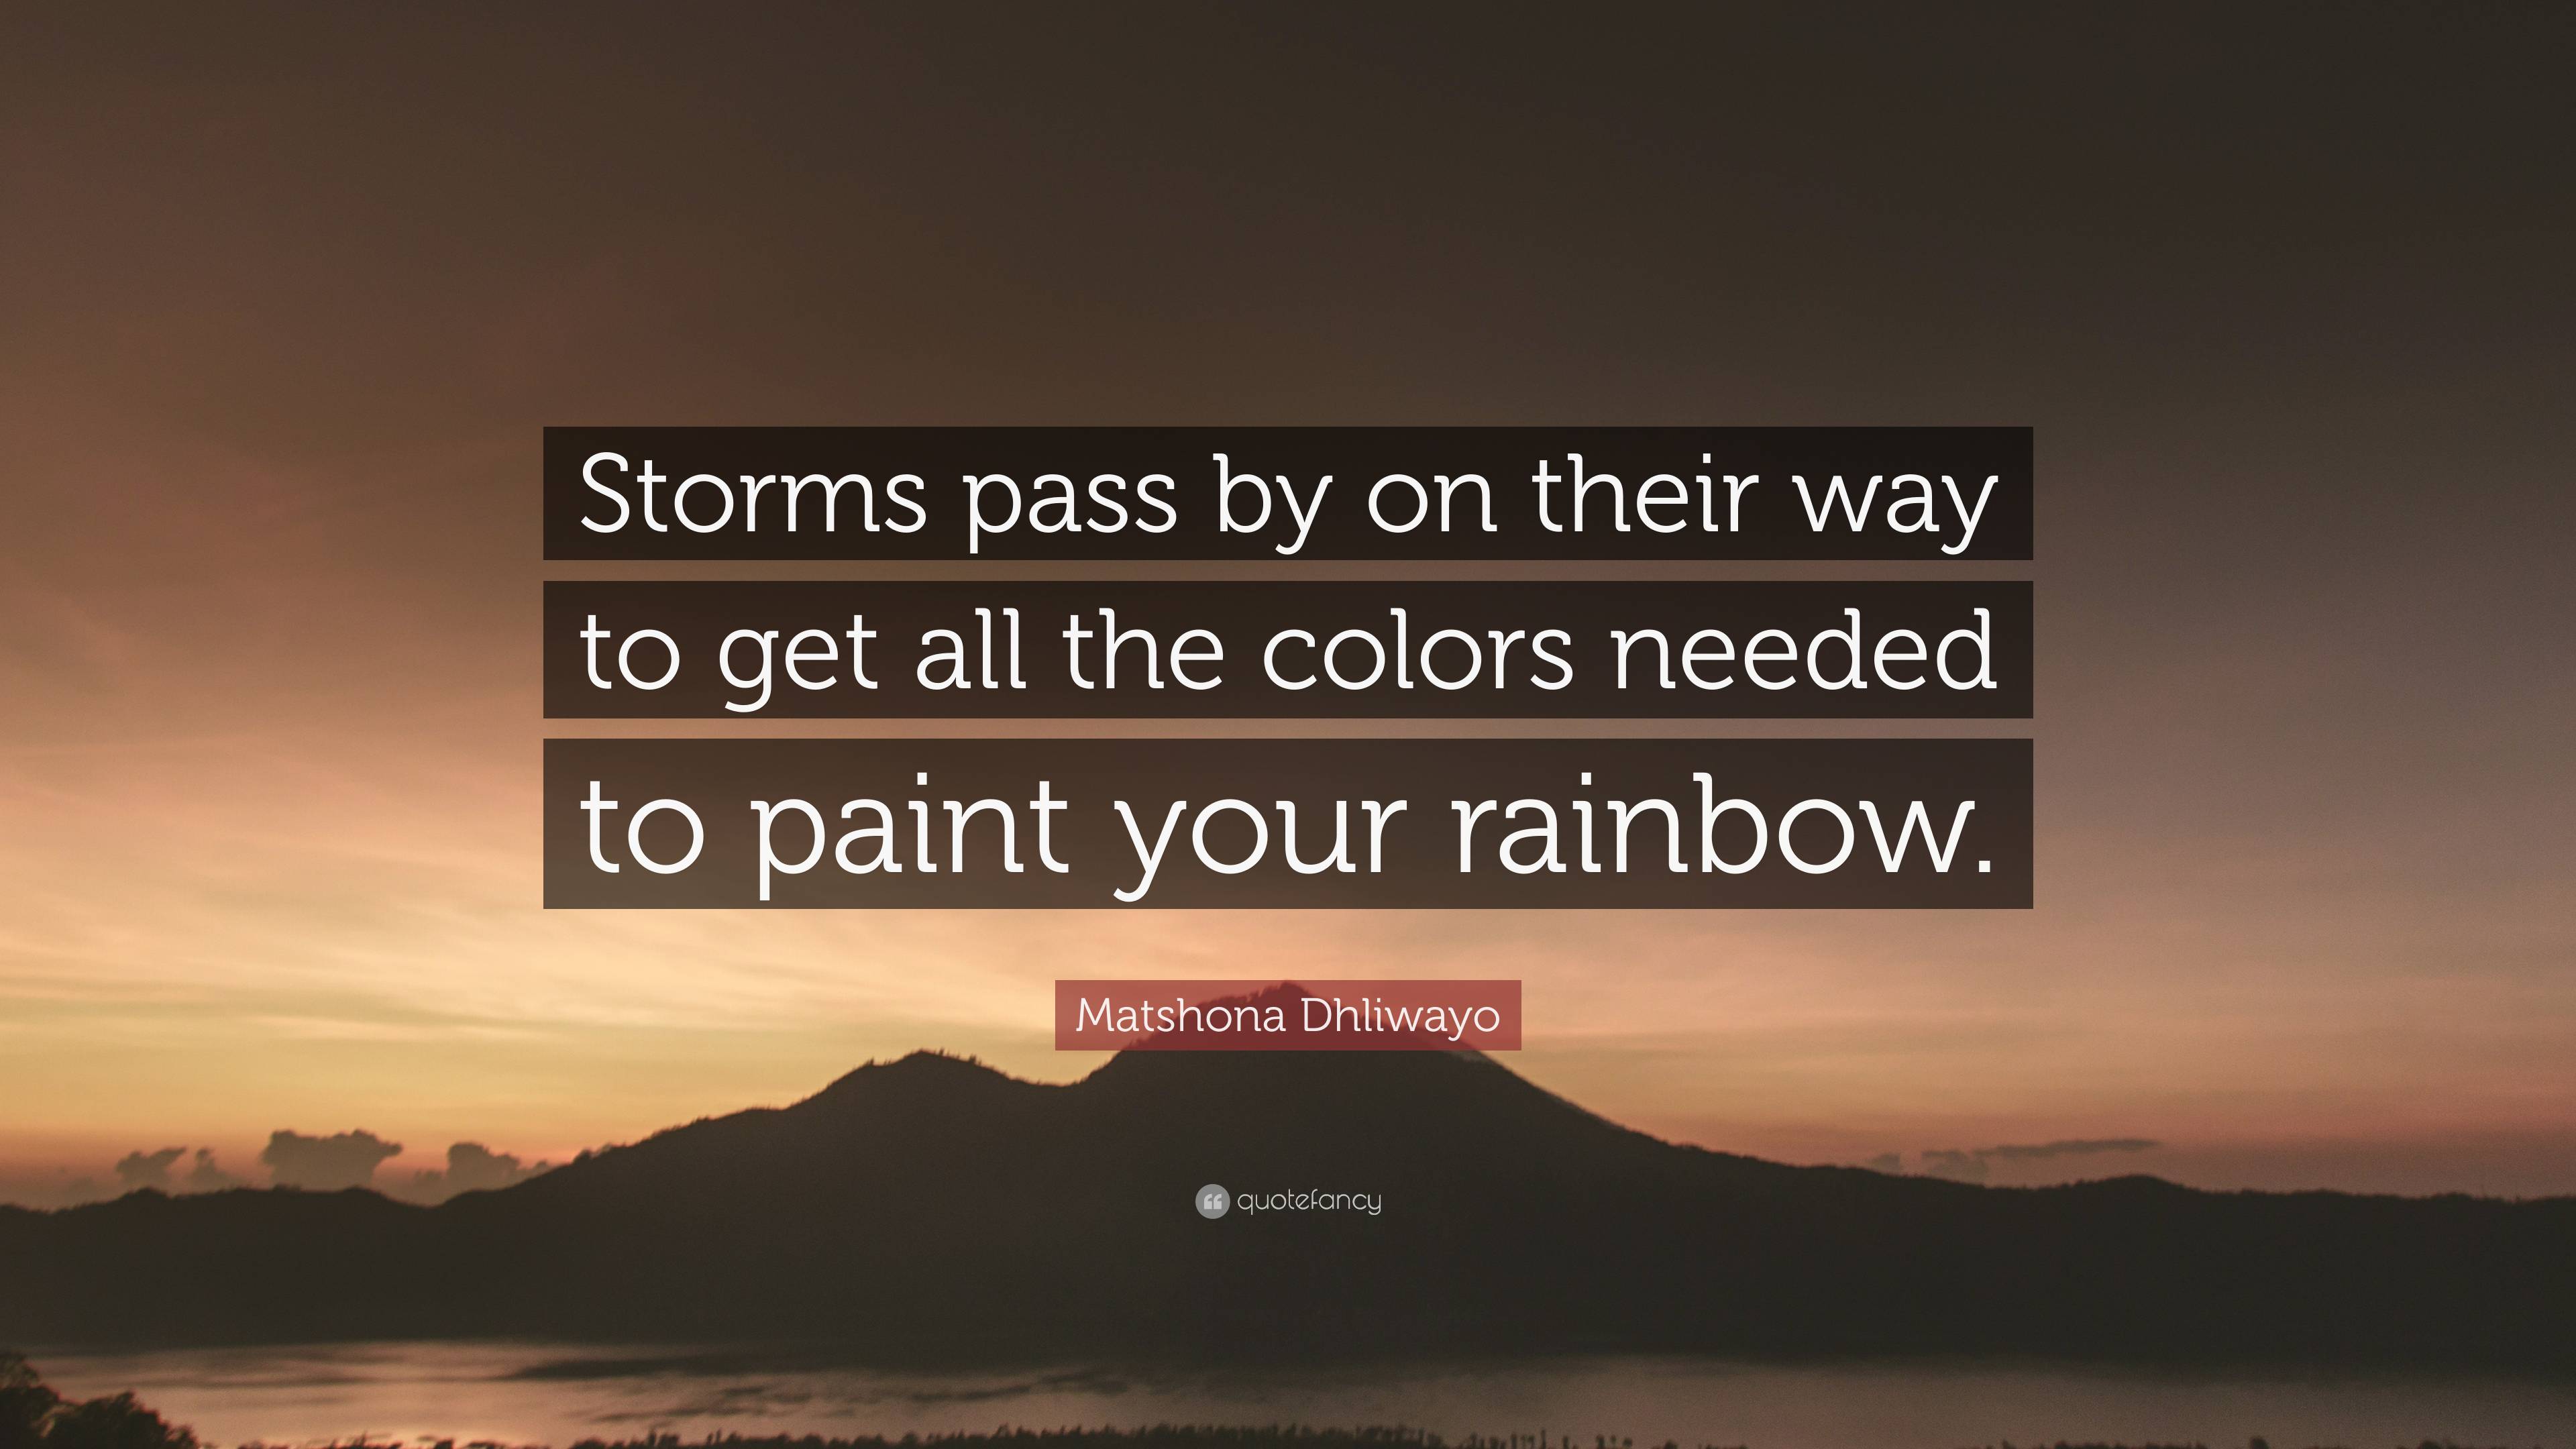 Matshona Dhliwayo Quote: “Storms pass by on their way to get all the ...